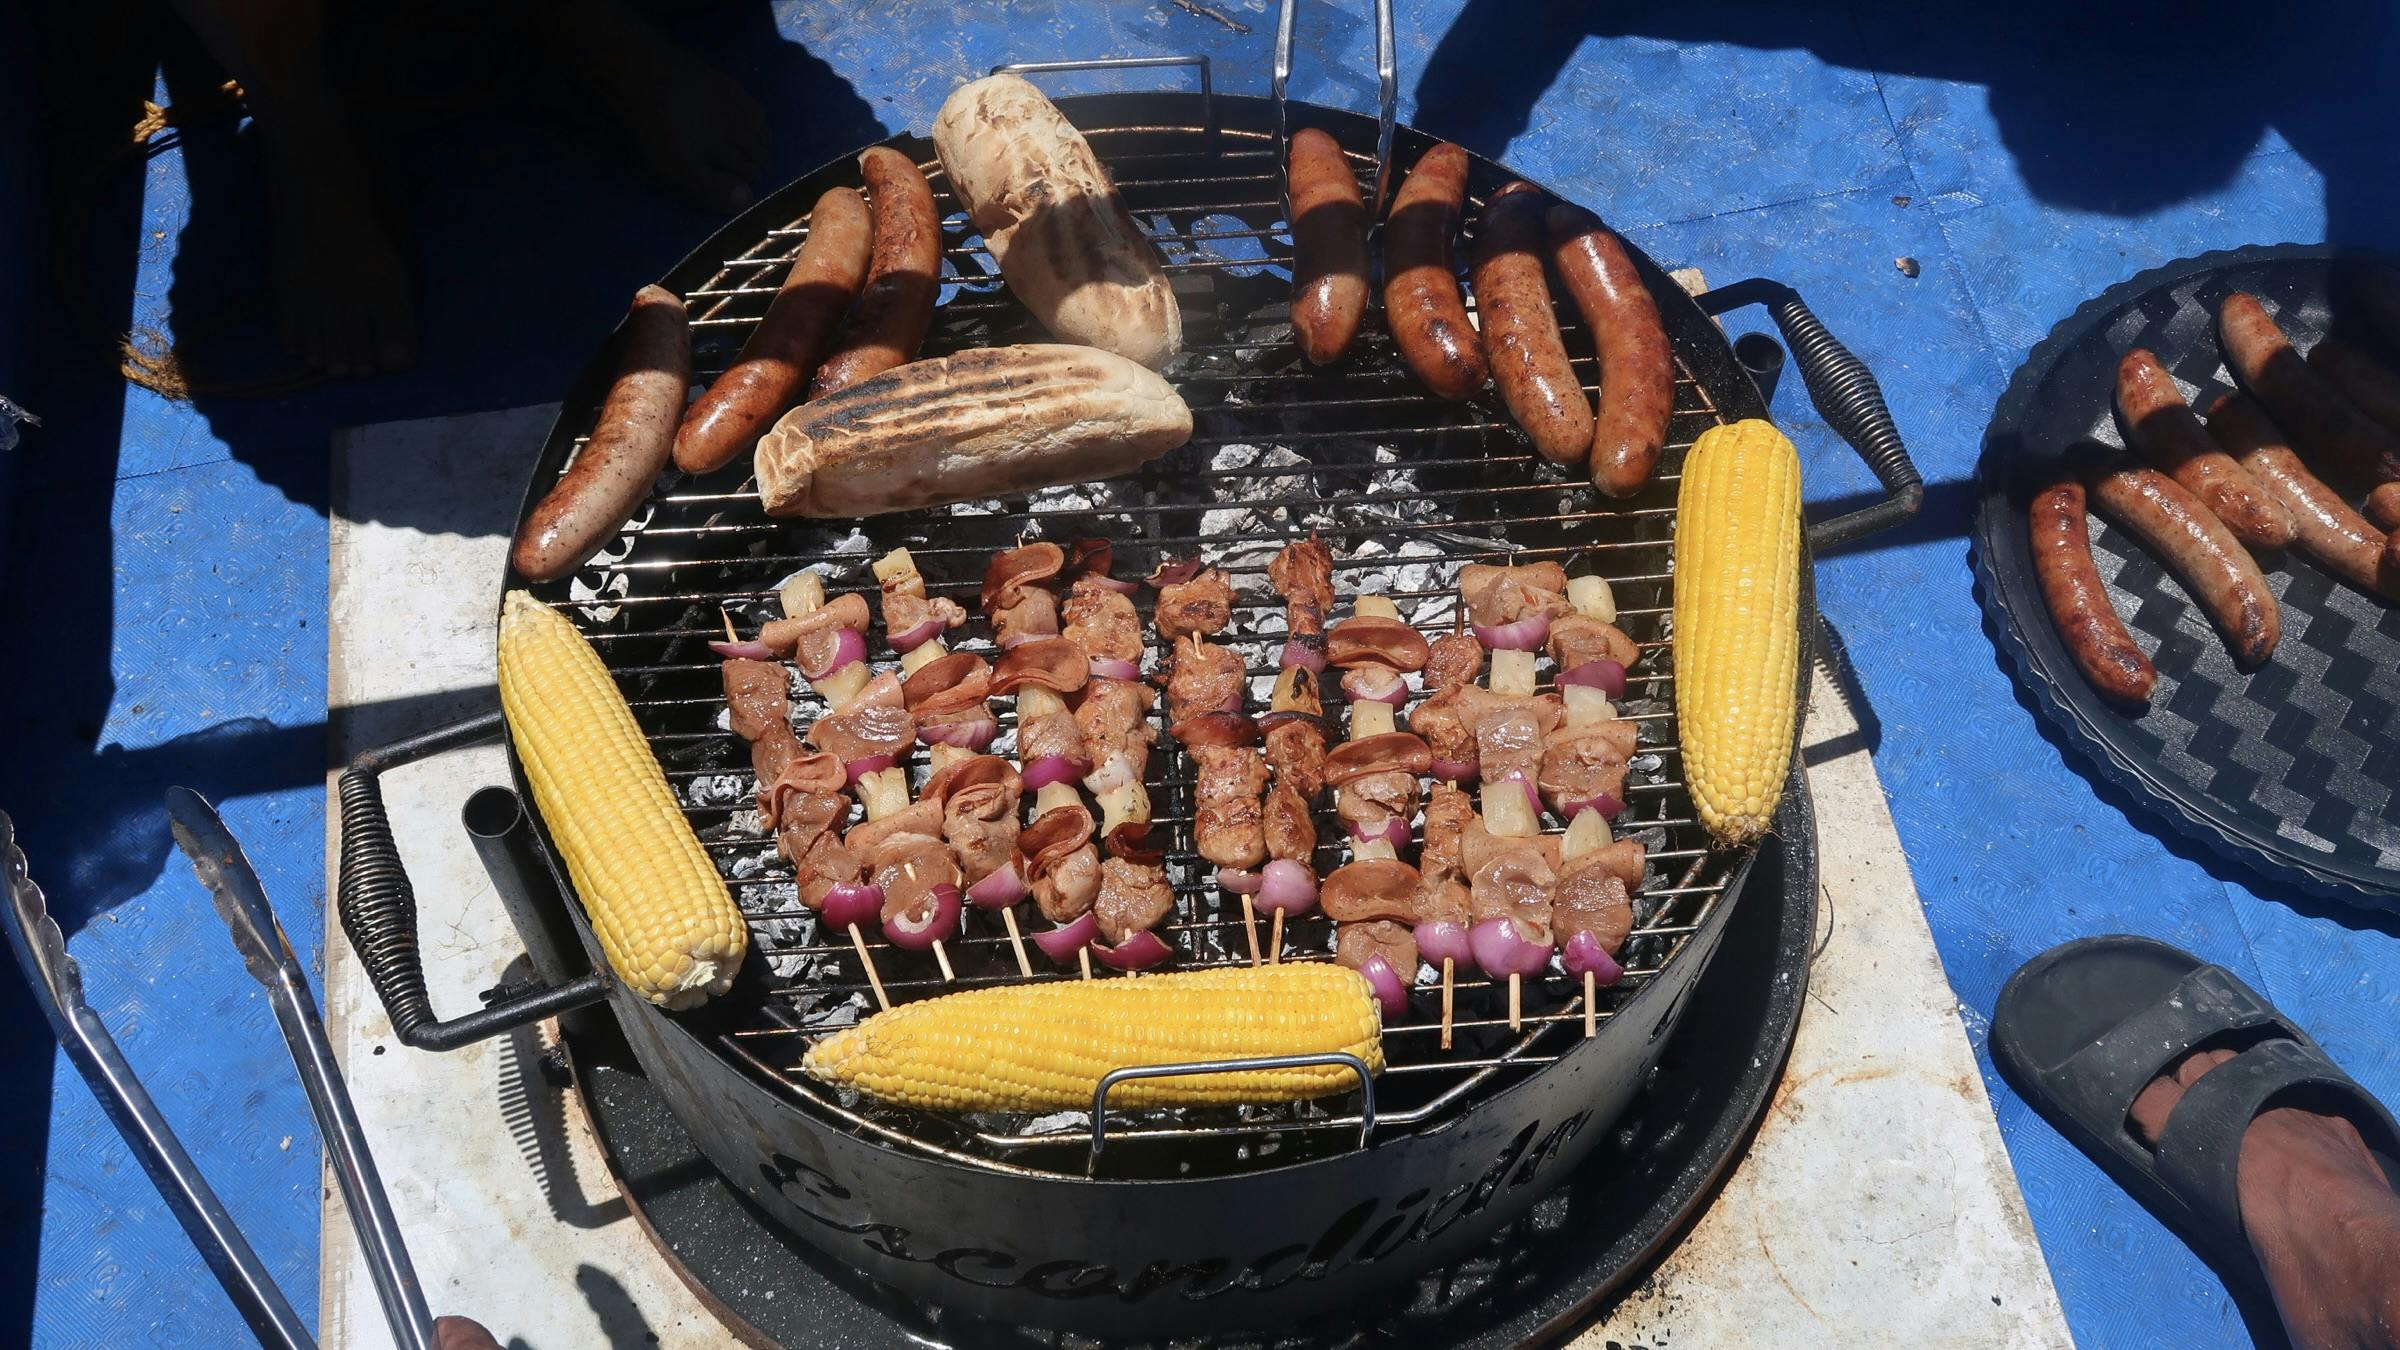 Chicken Thighs, Skewers, Vegetables and Rice - Our basic BBQ Lunch